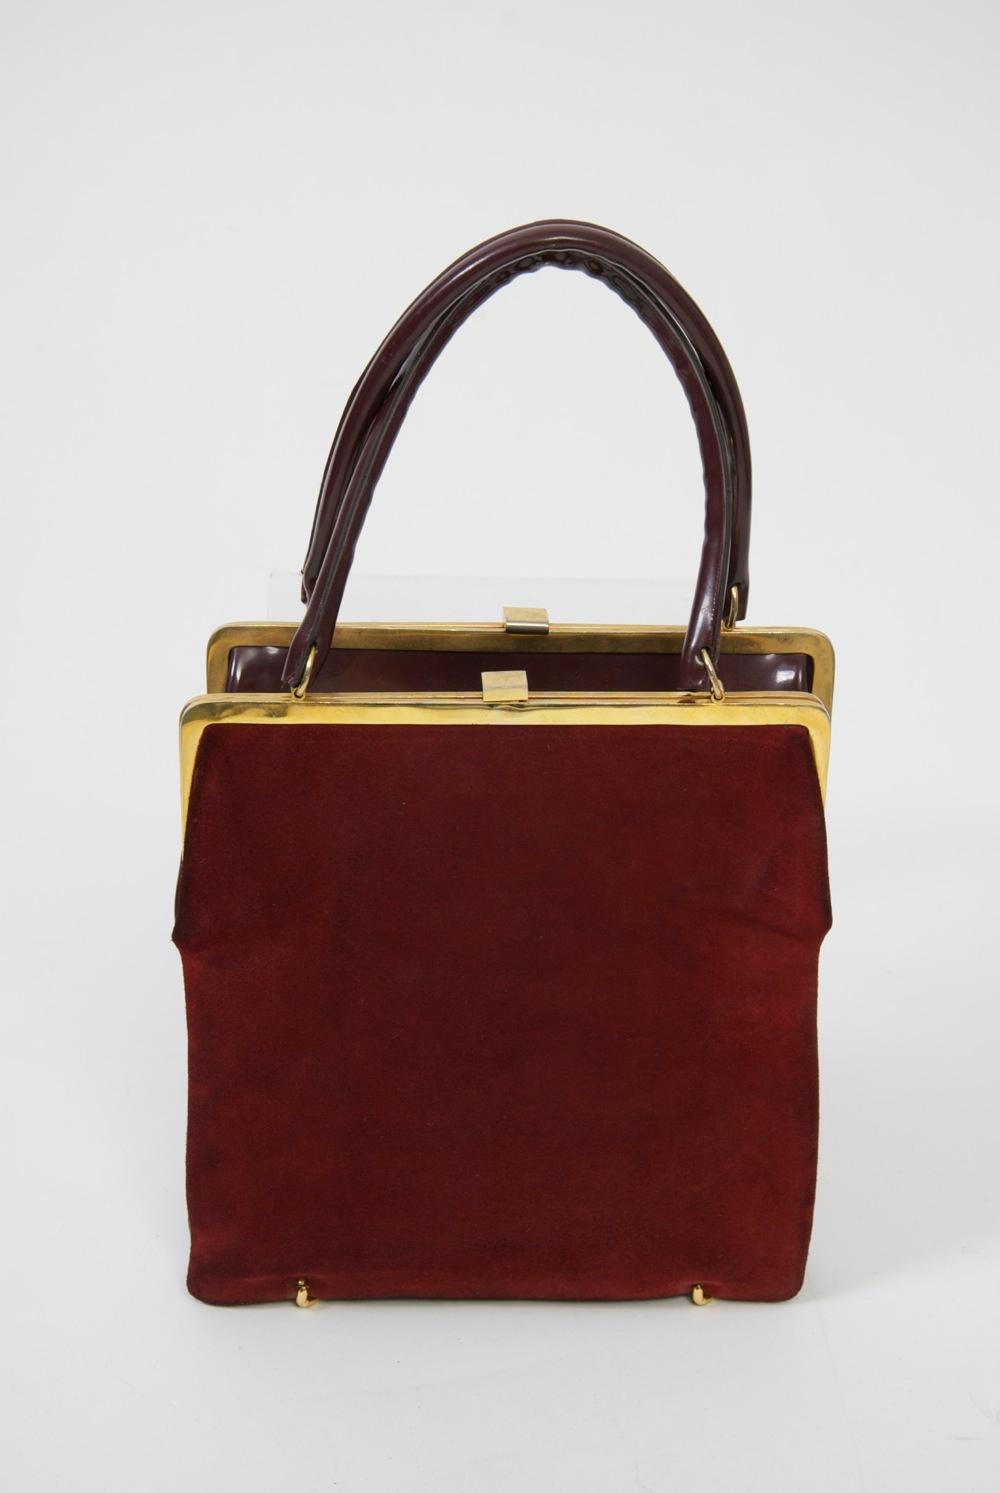 Unique, innovative design, this vintage handbag, c. 1960s, consists of two identical bags connected at bottom by goldtone rings, which allow it to reverse from wine suede to wine patent. Each has an identical gold metal frame and clasp, as well as